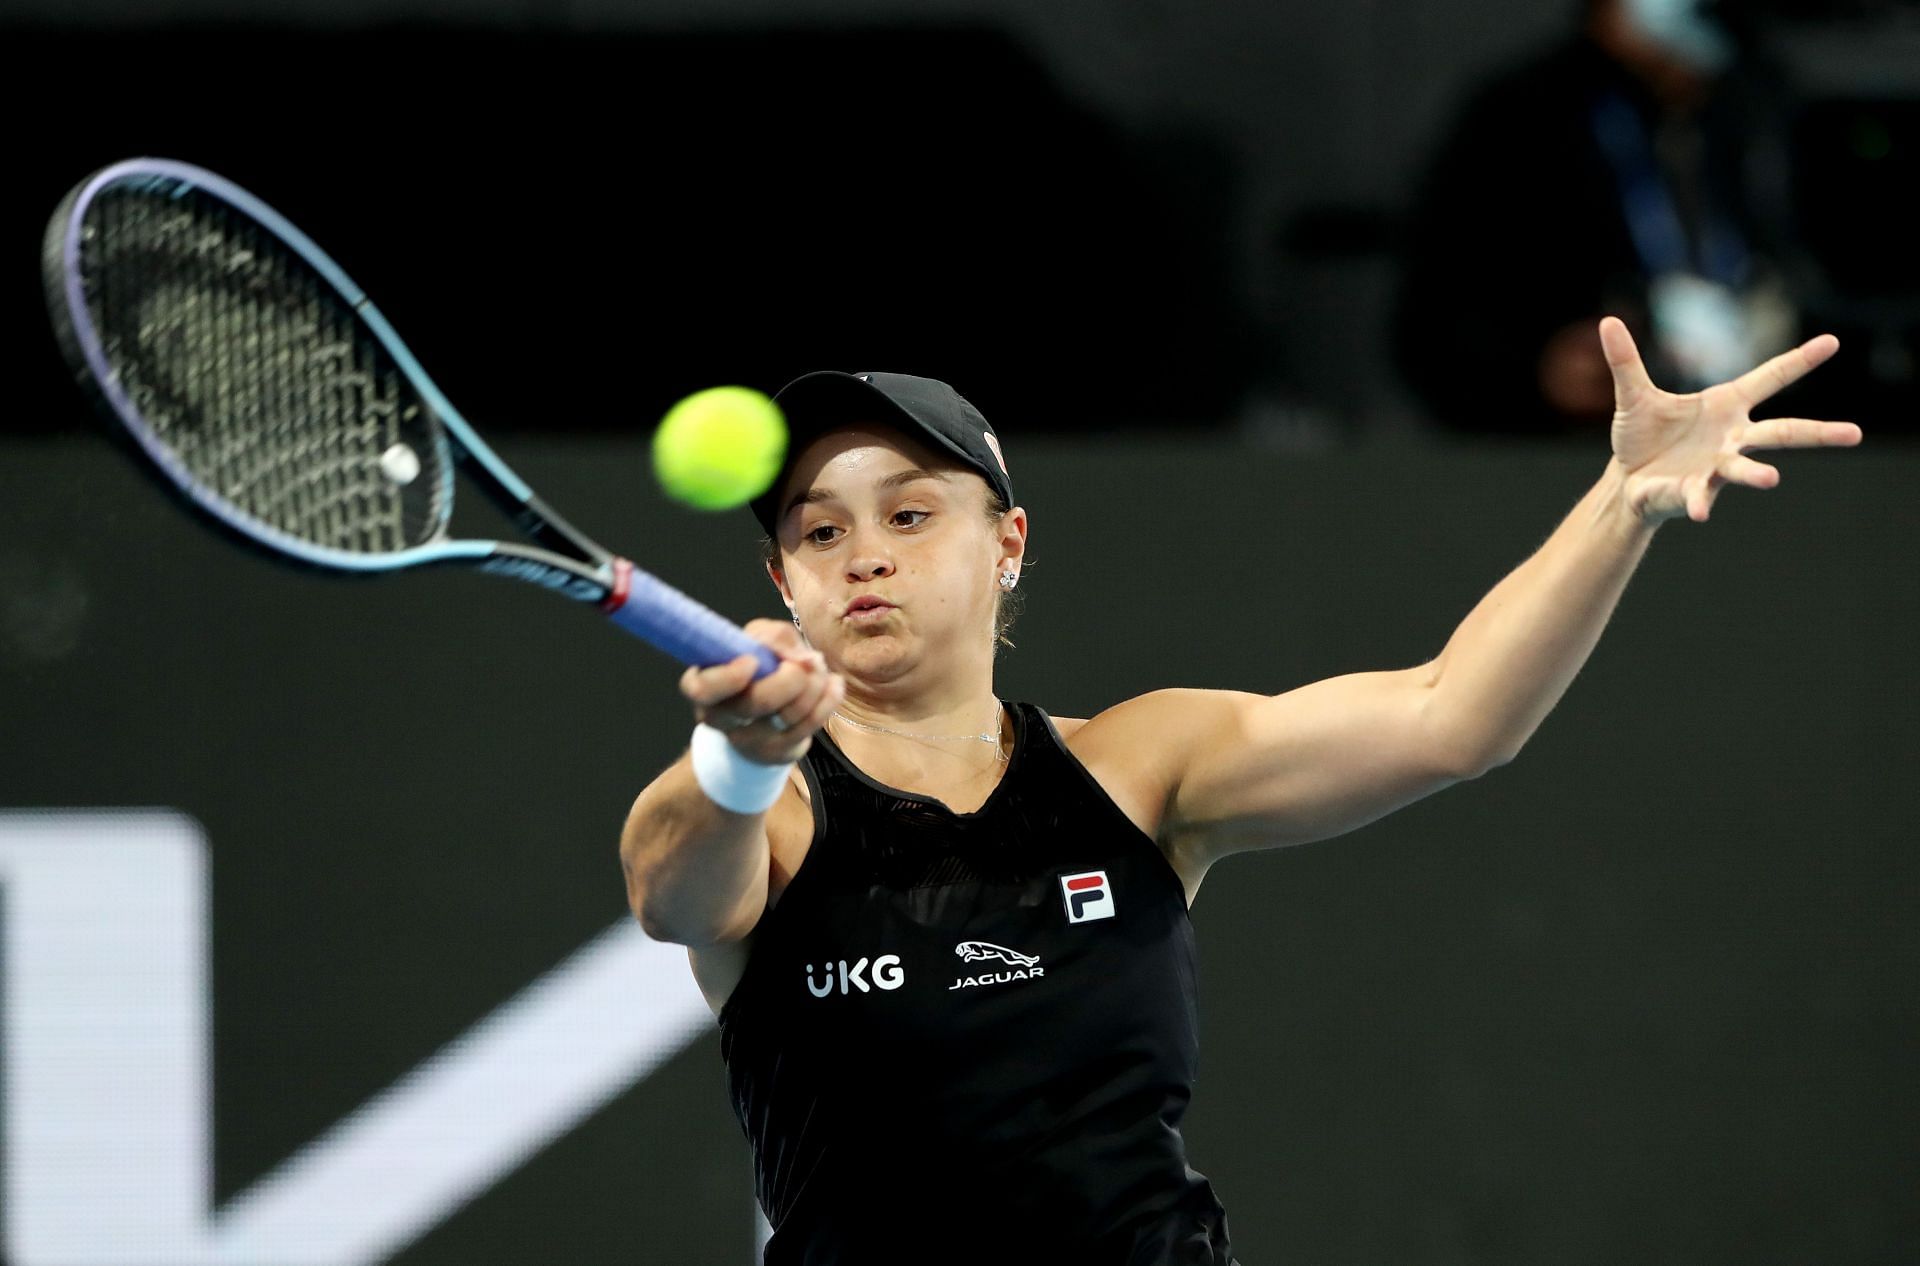 Ashleigh Barty reached the final of the Adelaide International with a straight-set win over Iga Swiatek